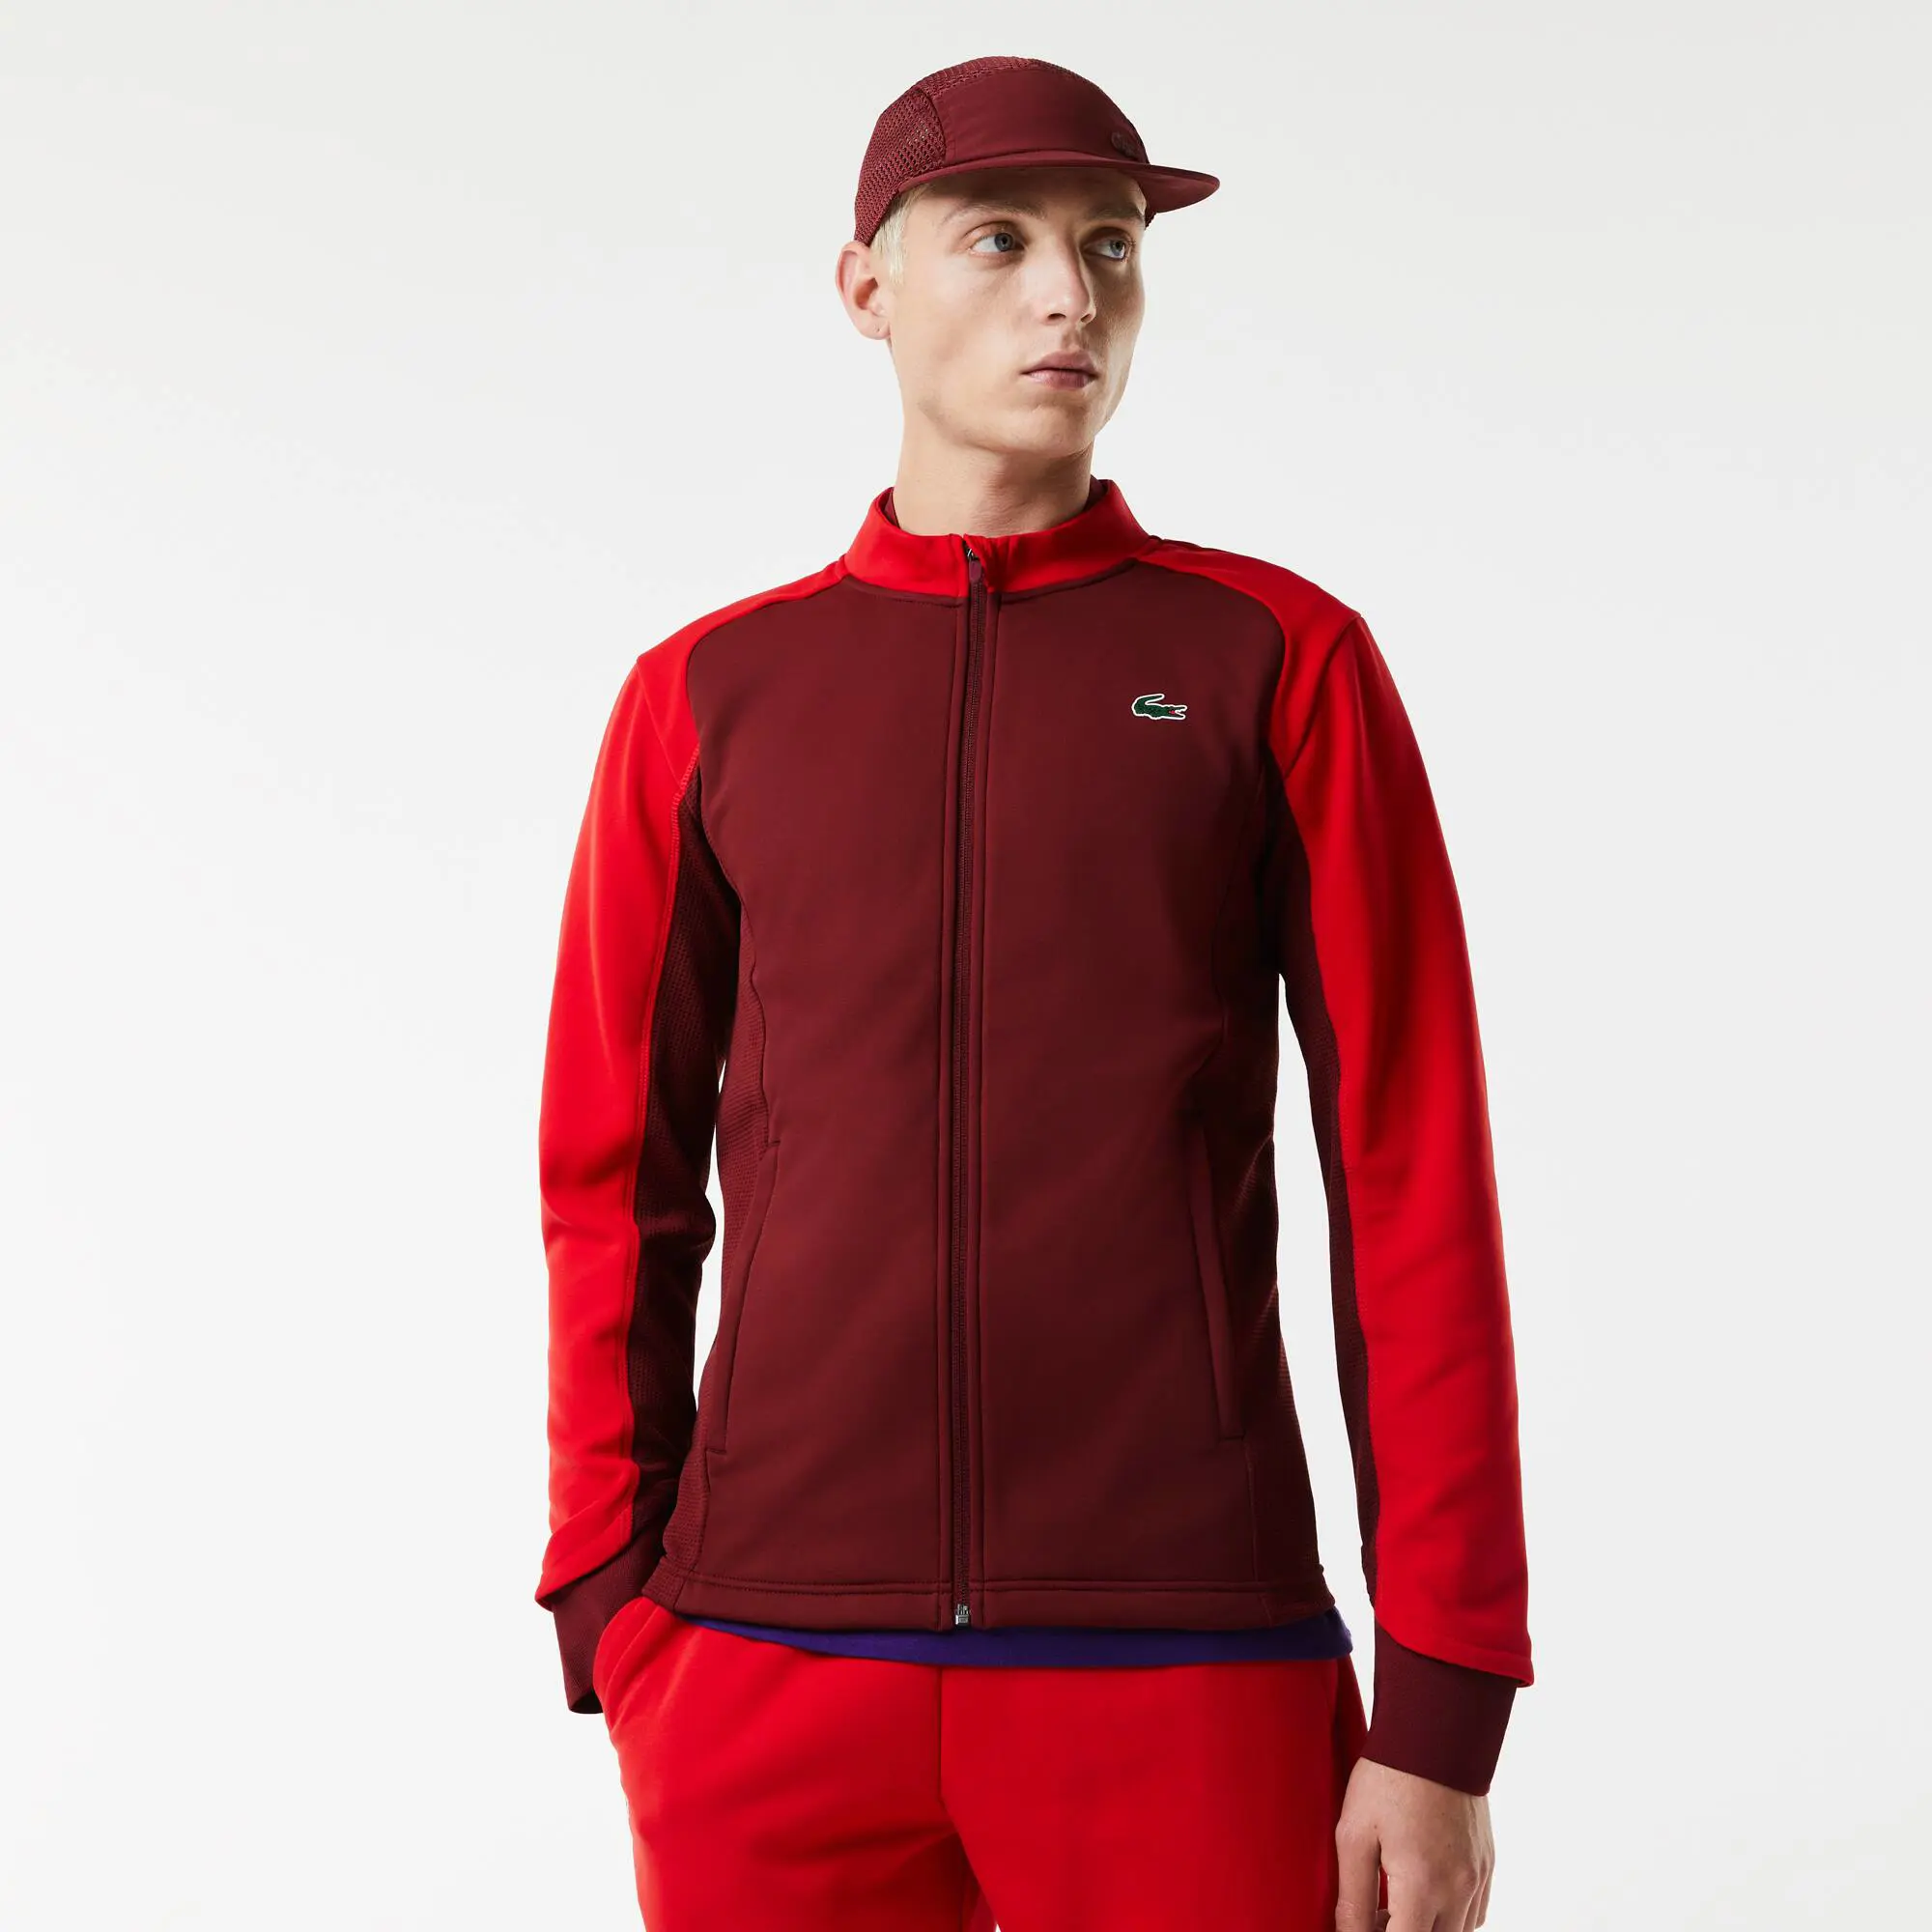 Lacoste Men's Lacoste SPORT Thermal Two-Ply Golf Jacket. 1